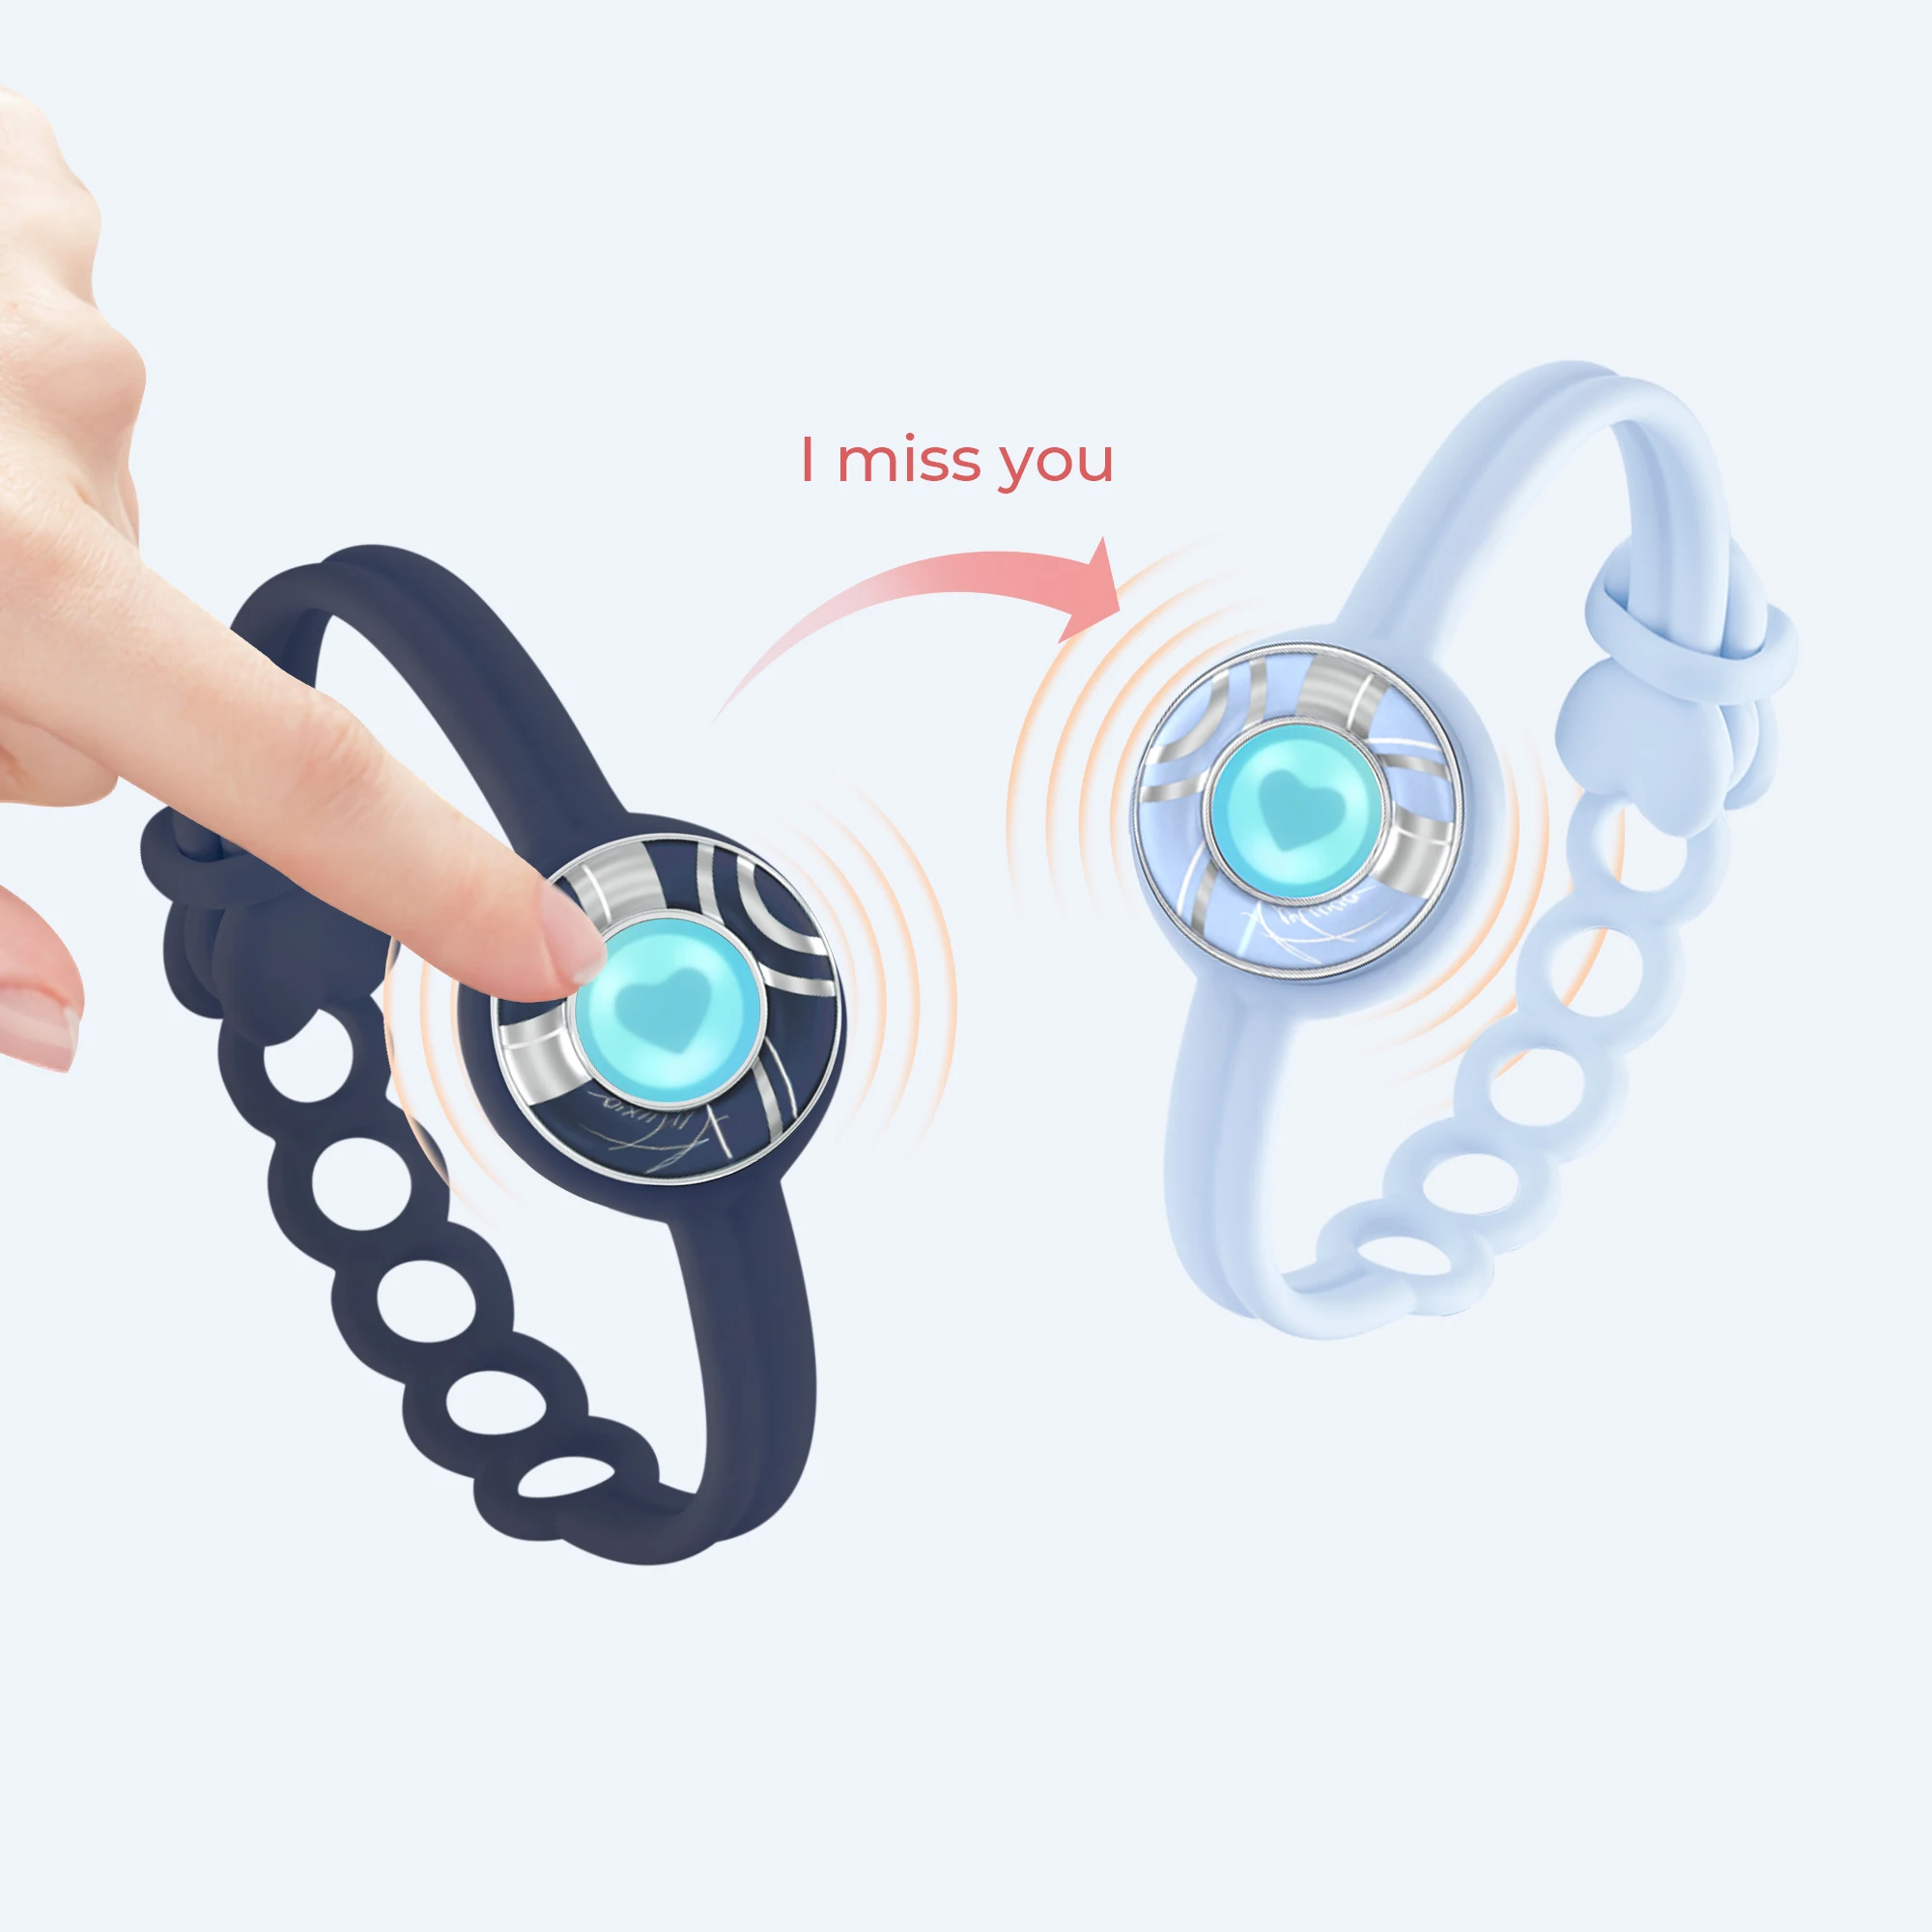 TOTWOO Long Distance Touch Bracelets for Couples, Vibration and